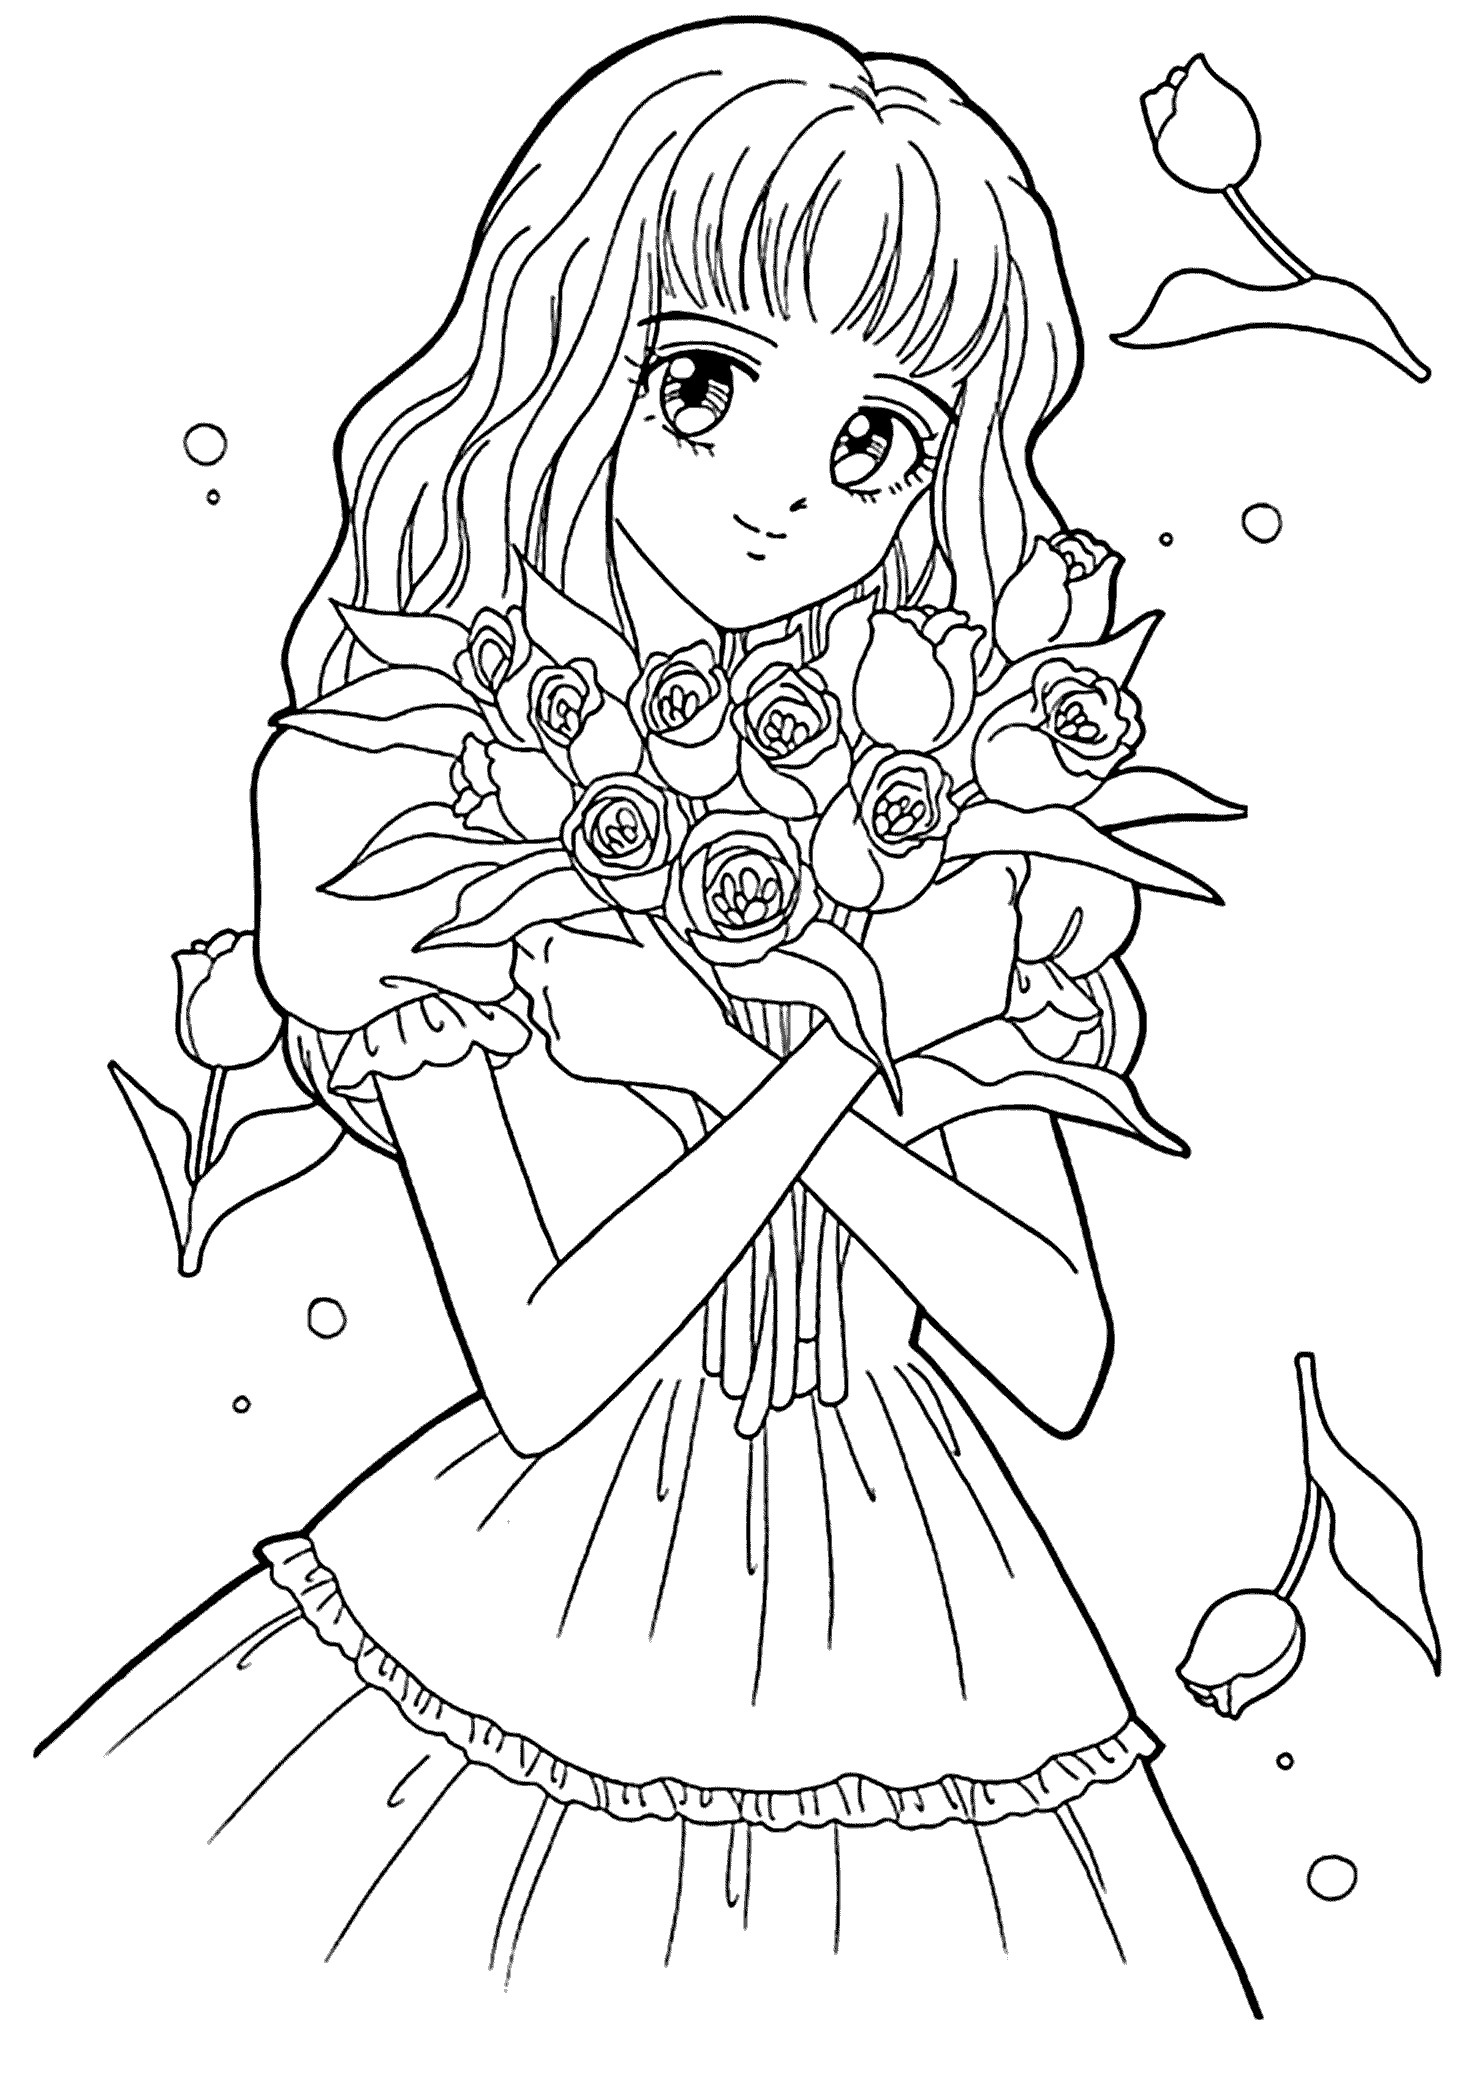 Coloring Pages For Girls Printable
 Best Free Printable Coloring Pages for Kids and Teens